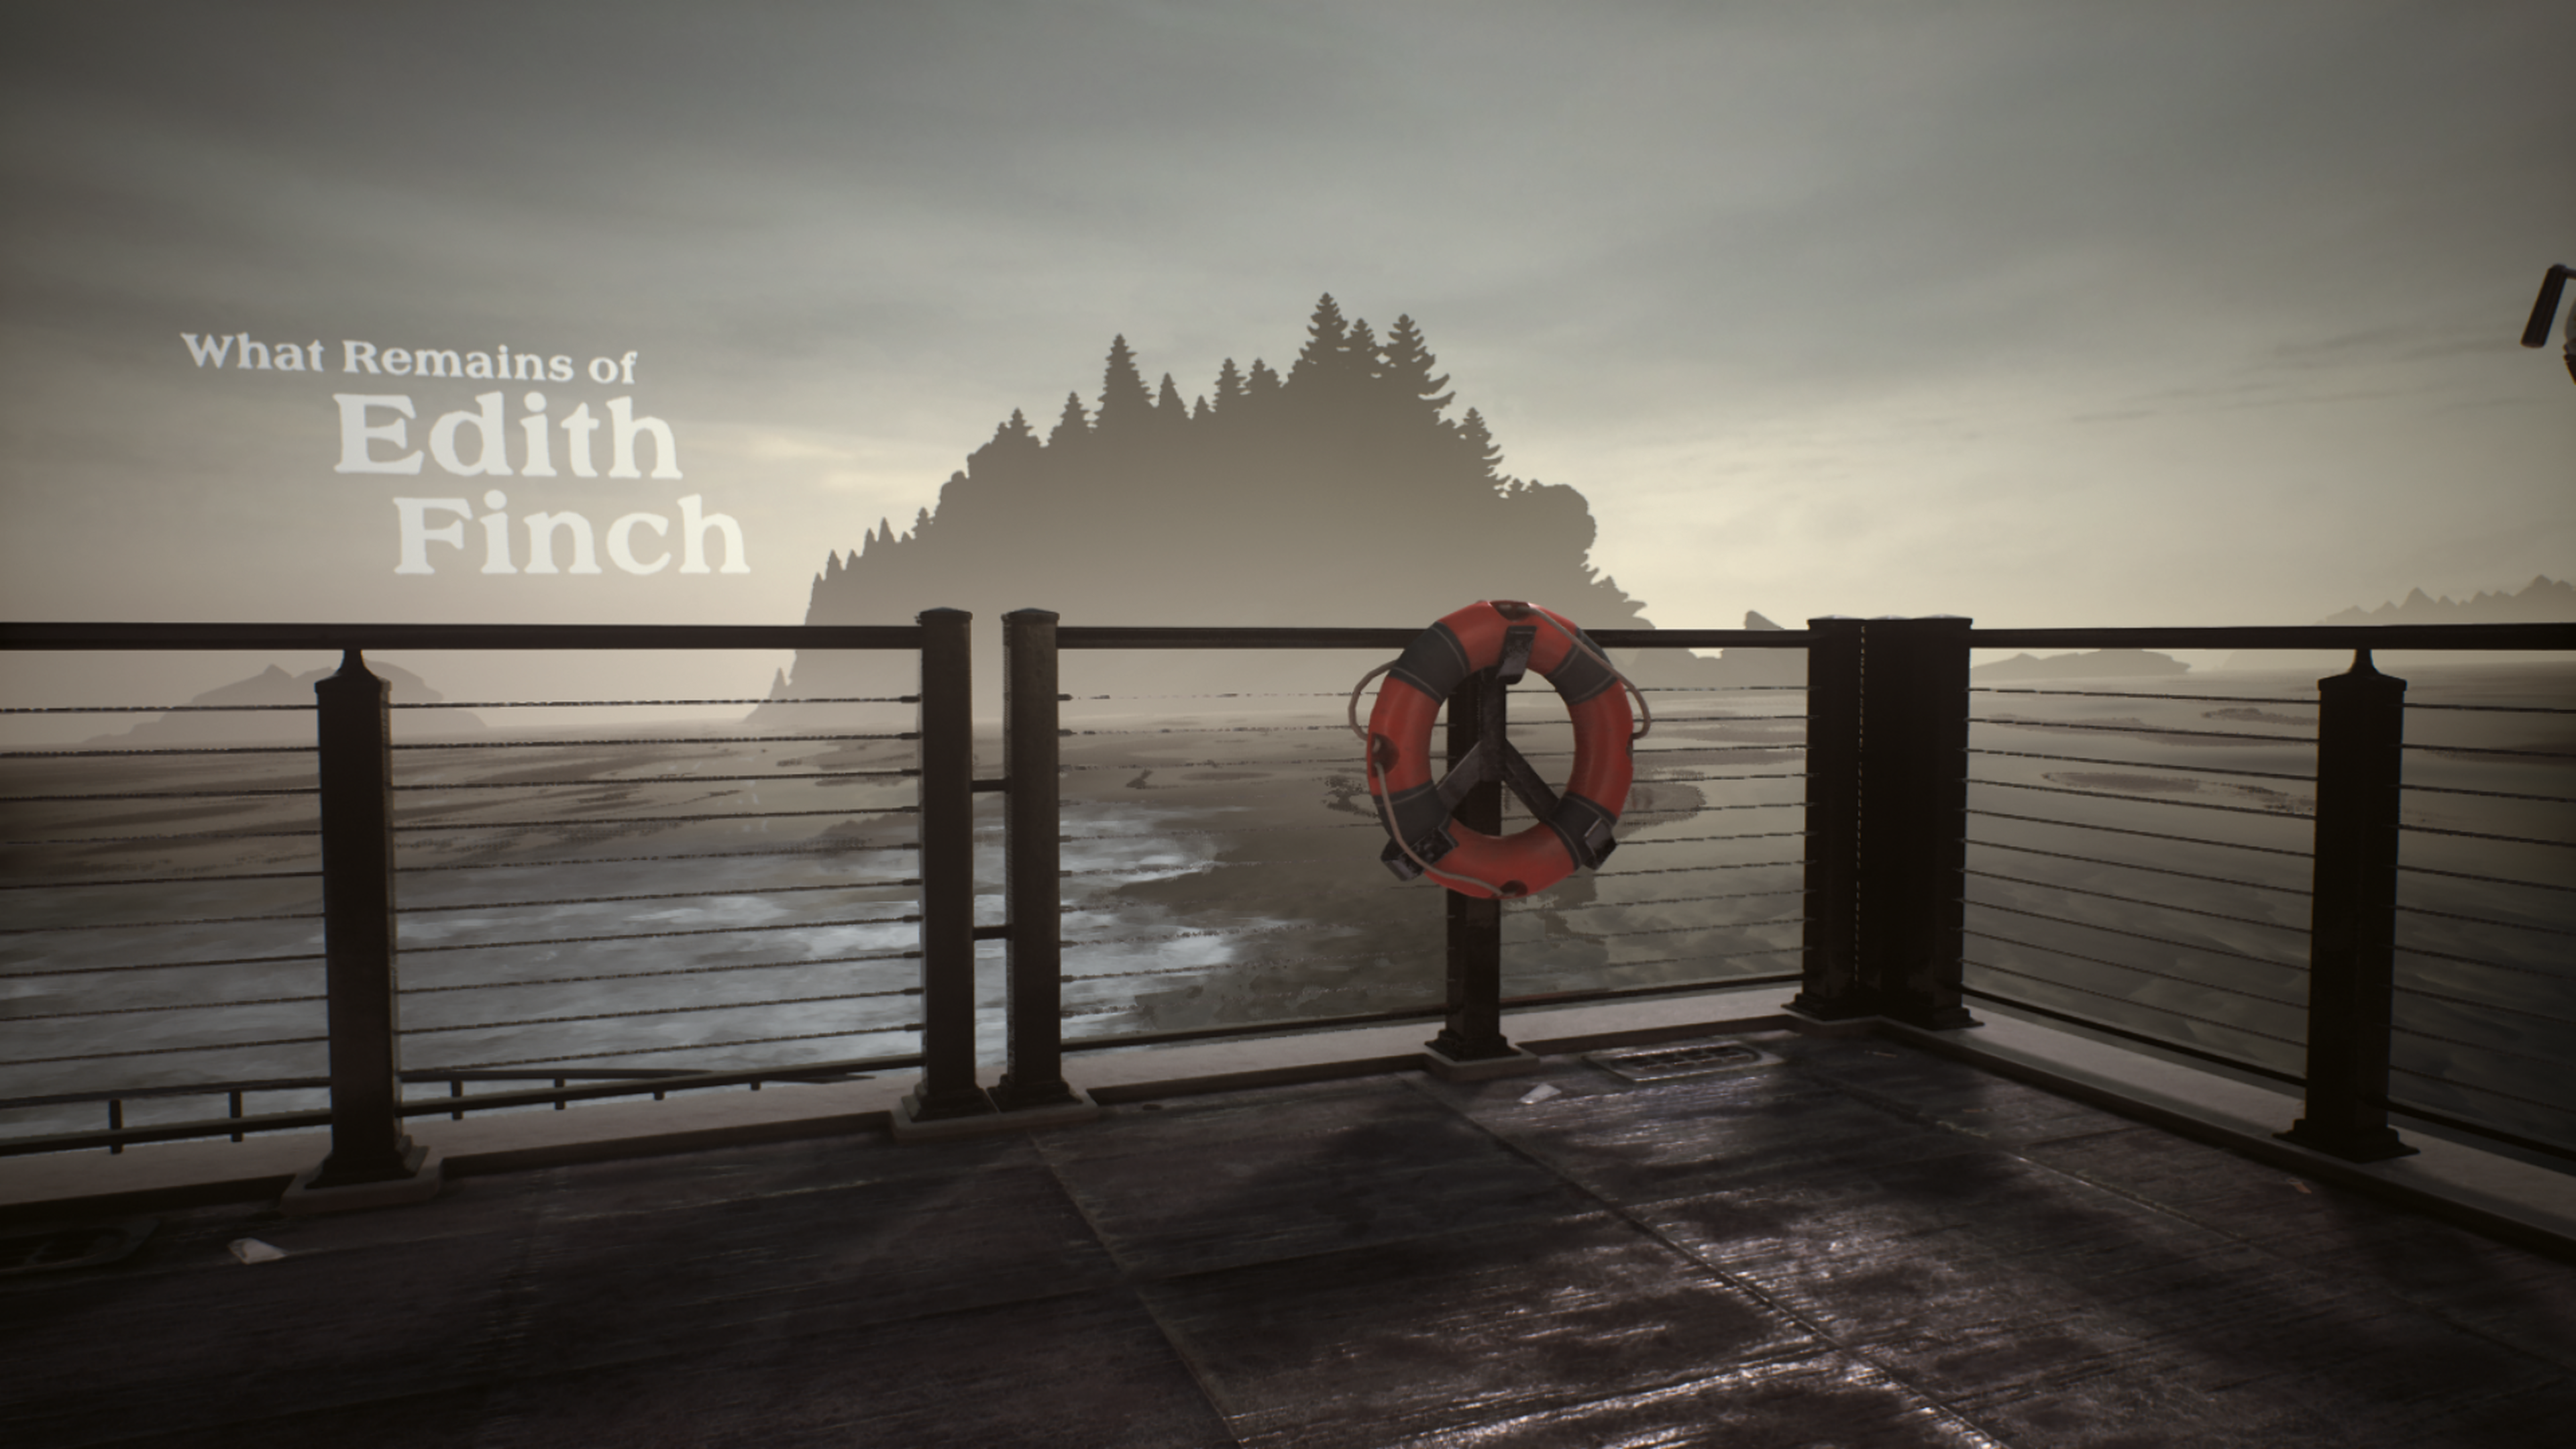 The Memory of Edith Finch